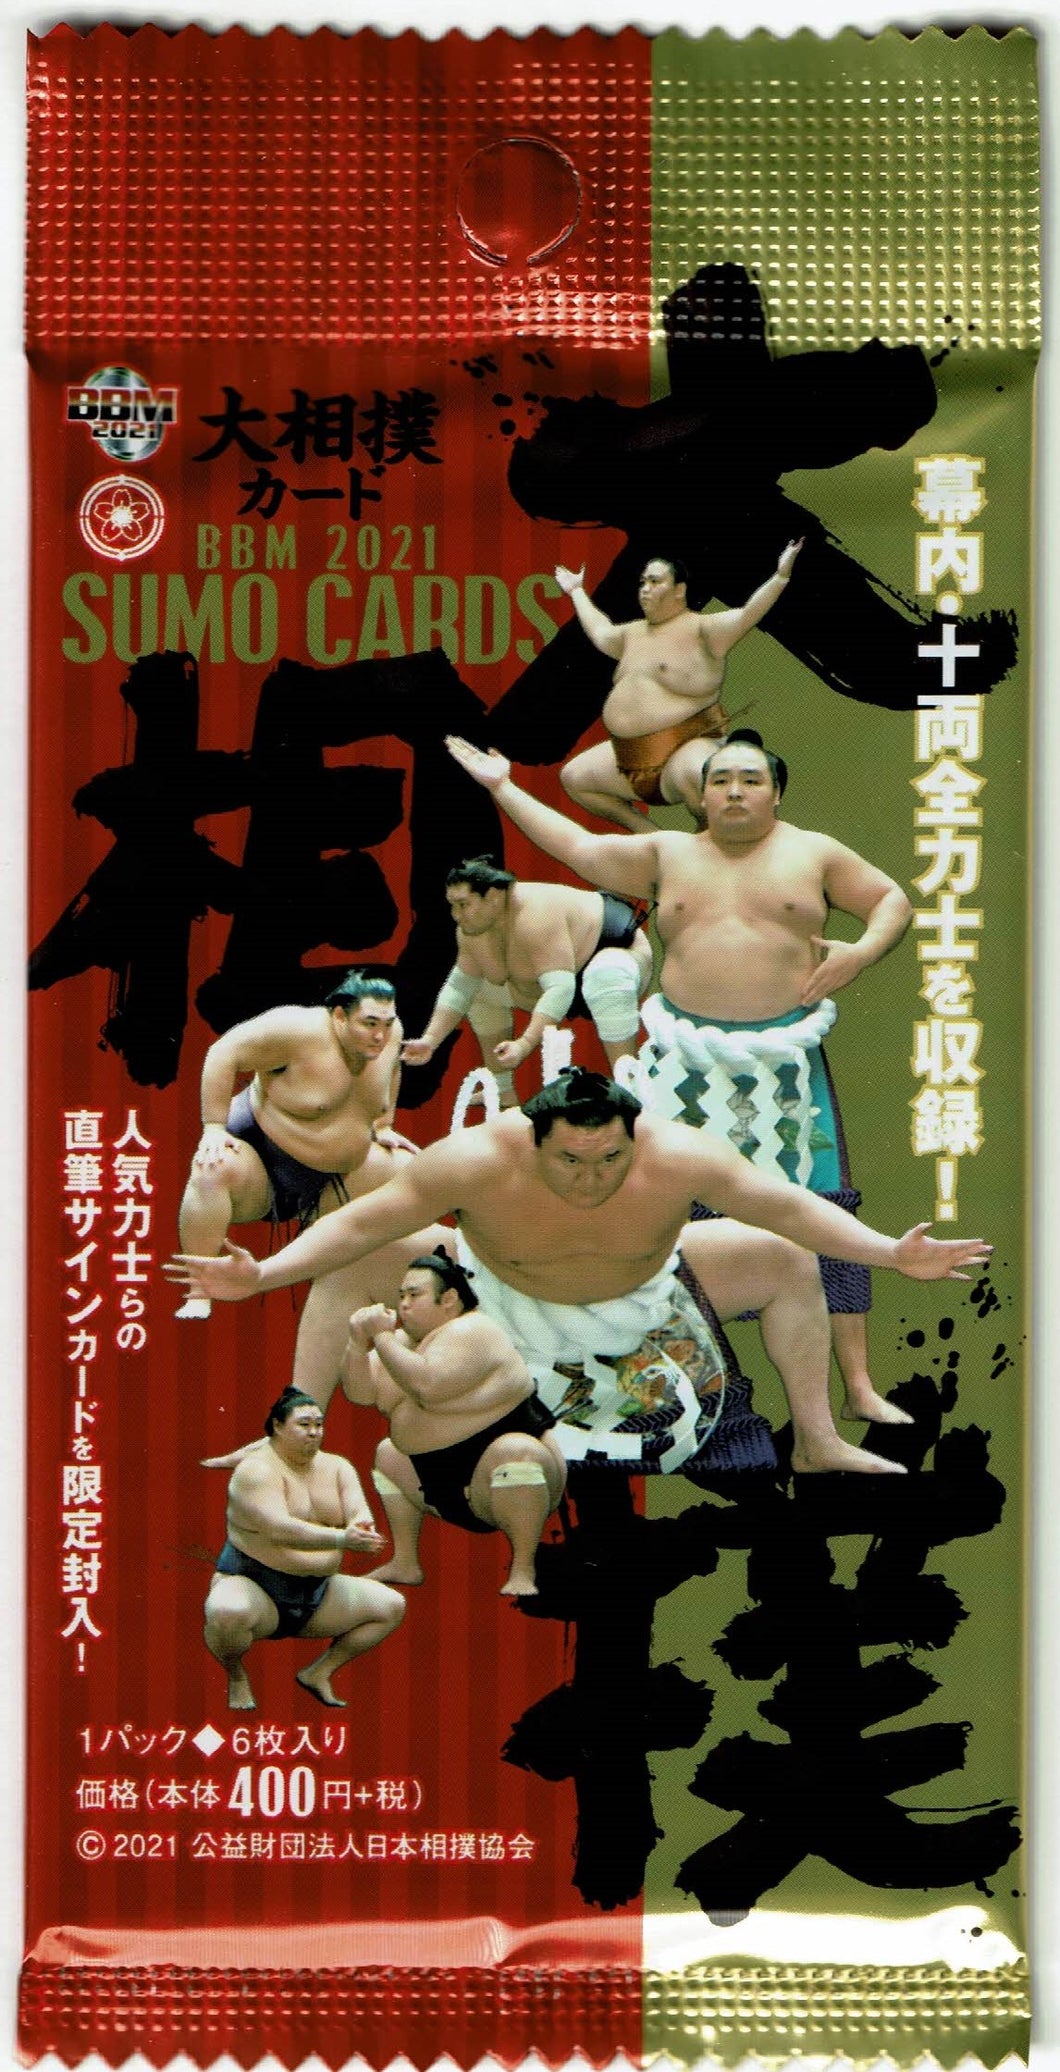 Sumo Trading Cards 2021 series 1